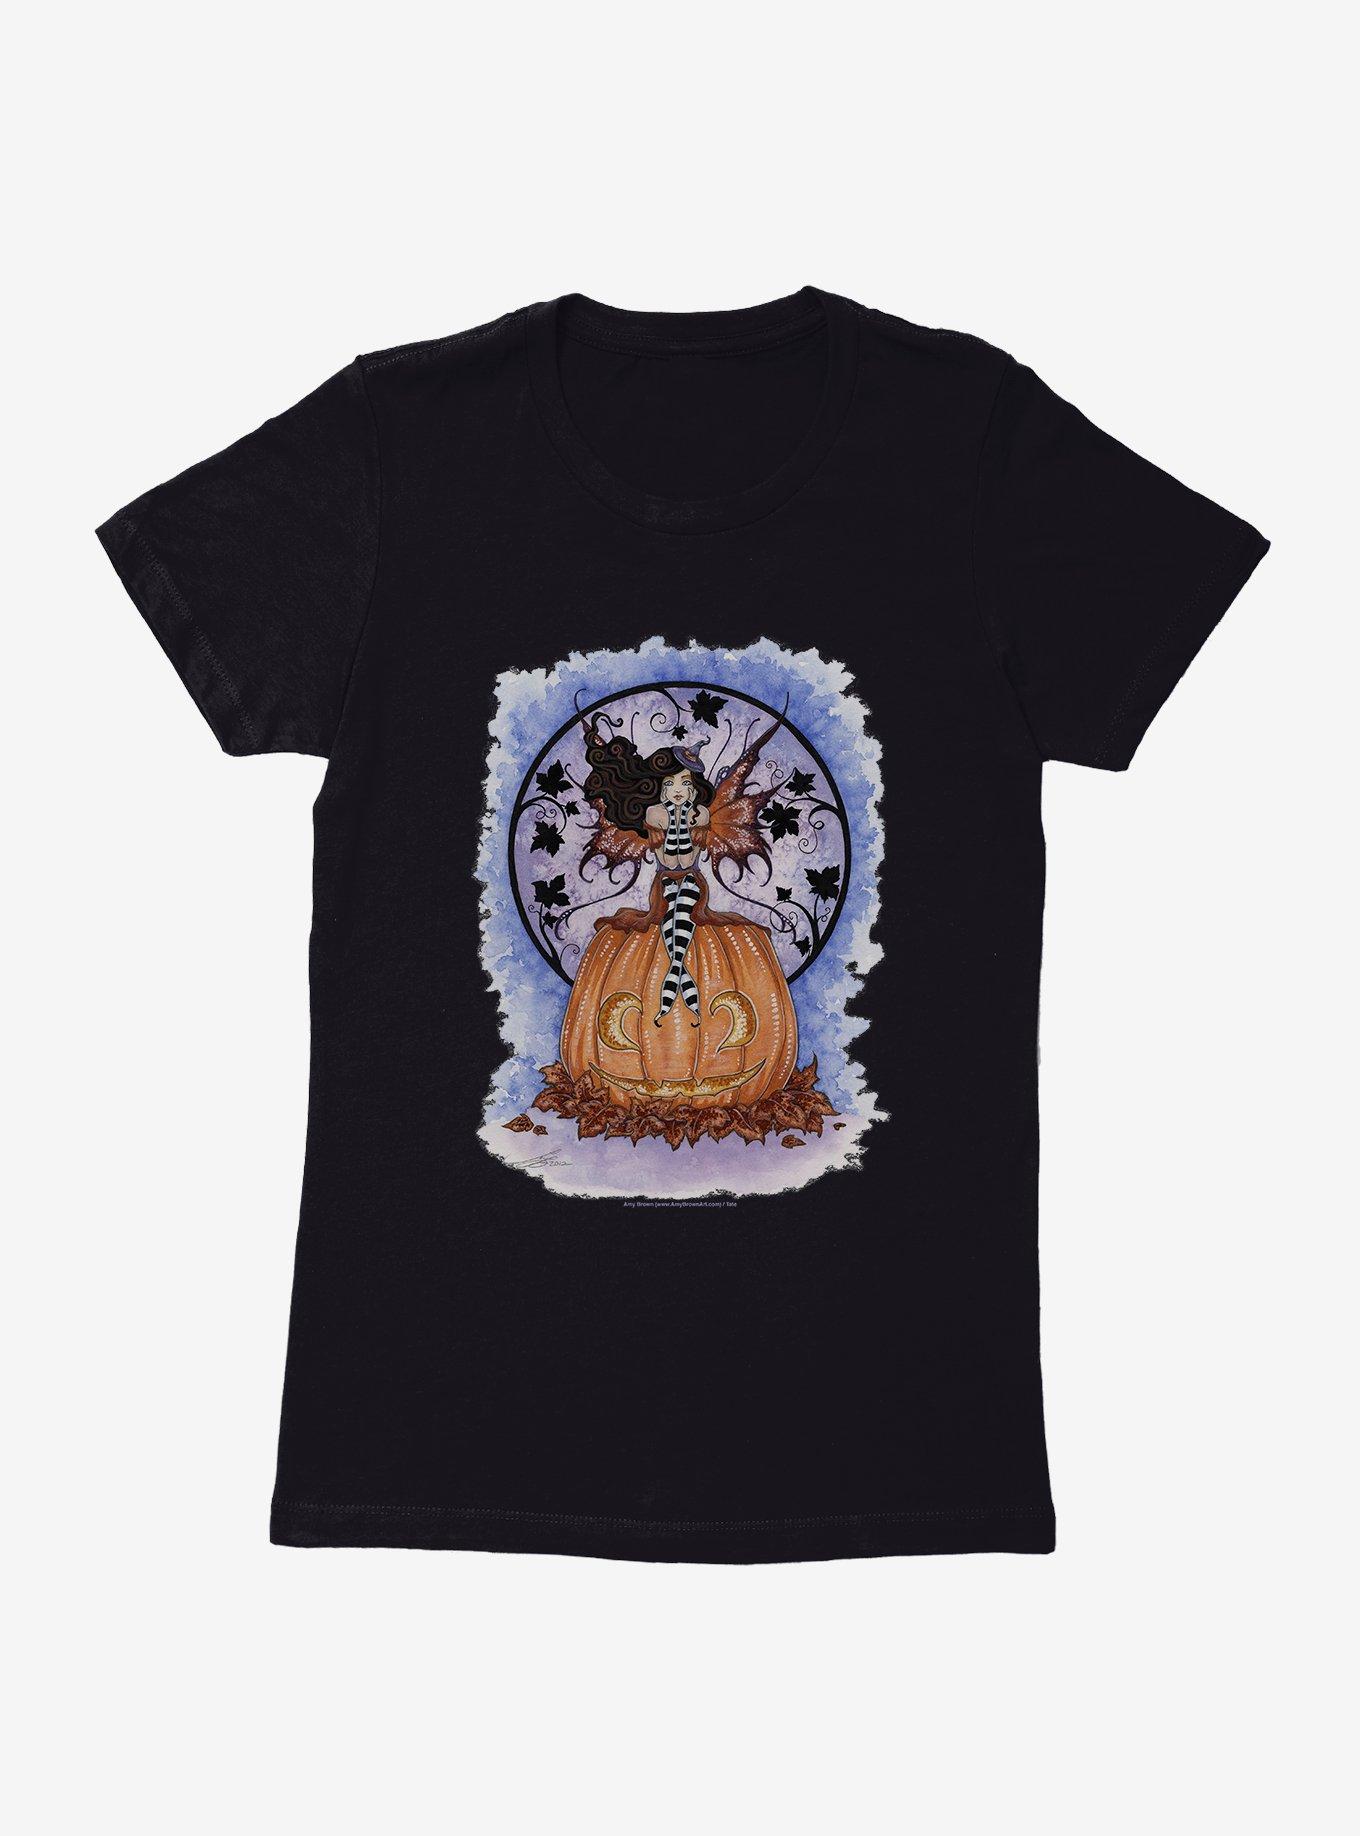 Is It Halloween Yet Womens T-Shirt by Amy Brown, , hi-res